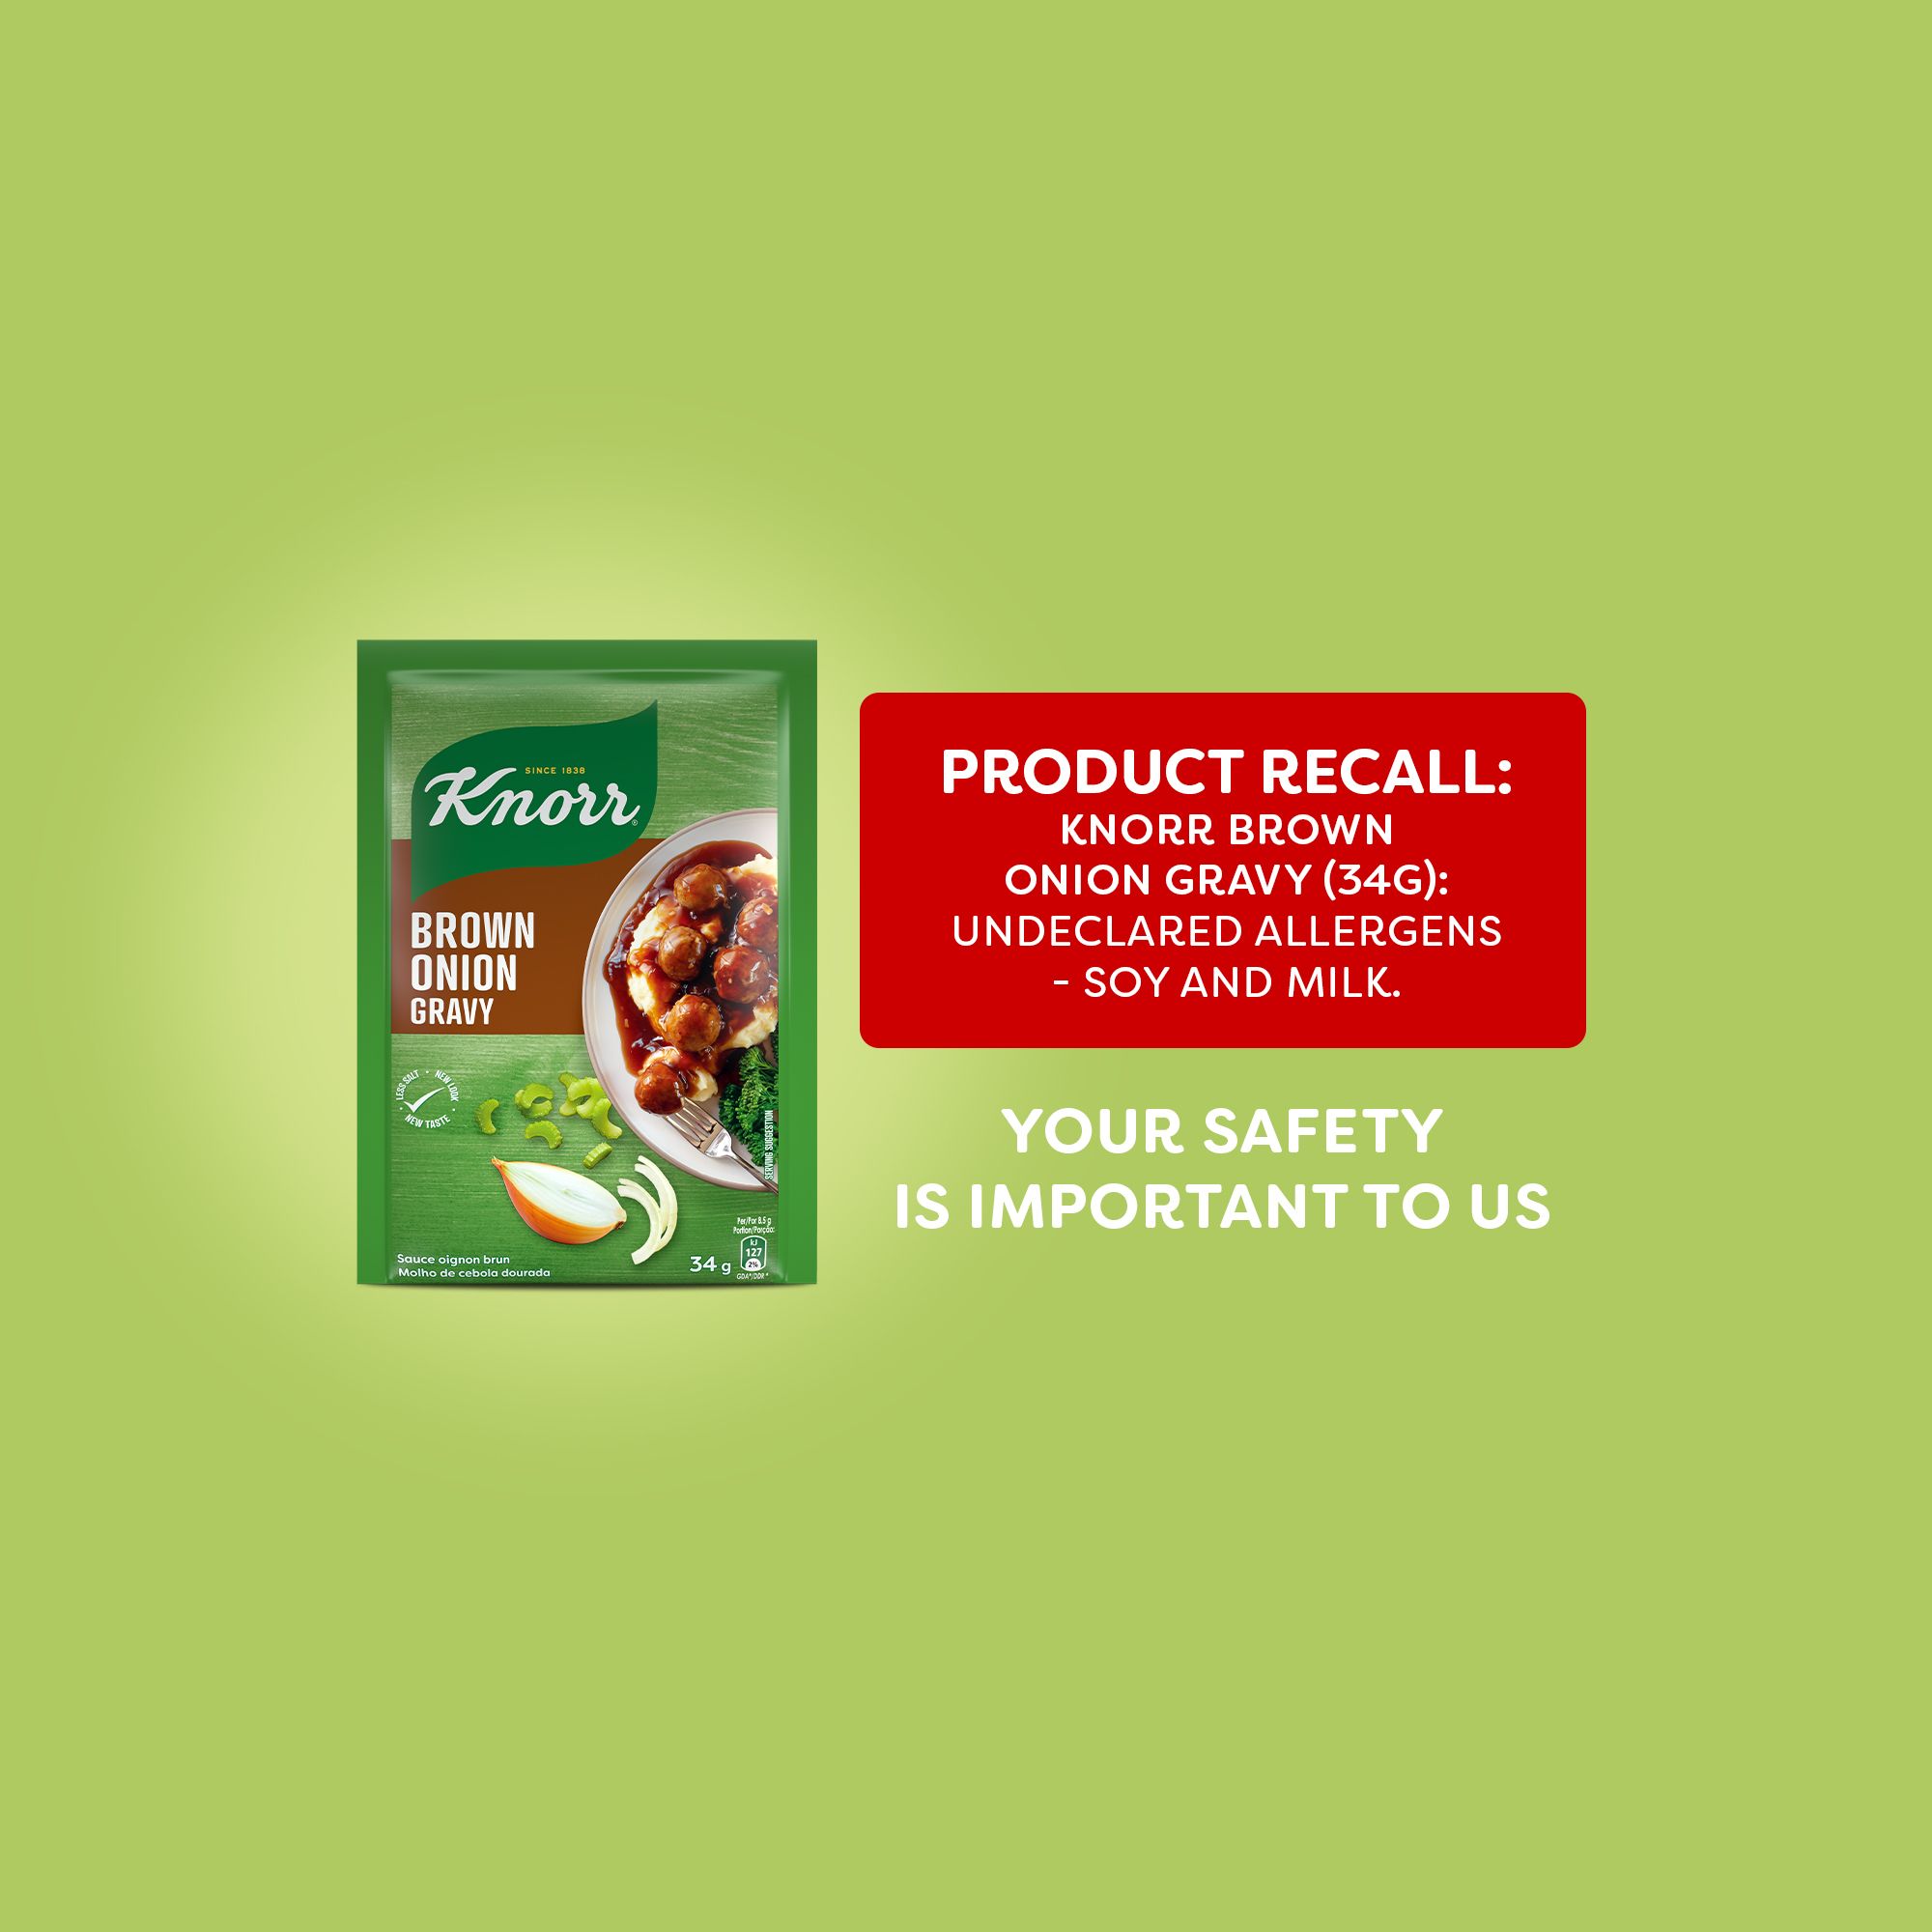 Product Recall for Knorr Brown Onion Gravy